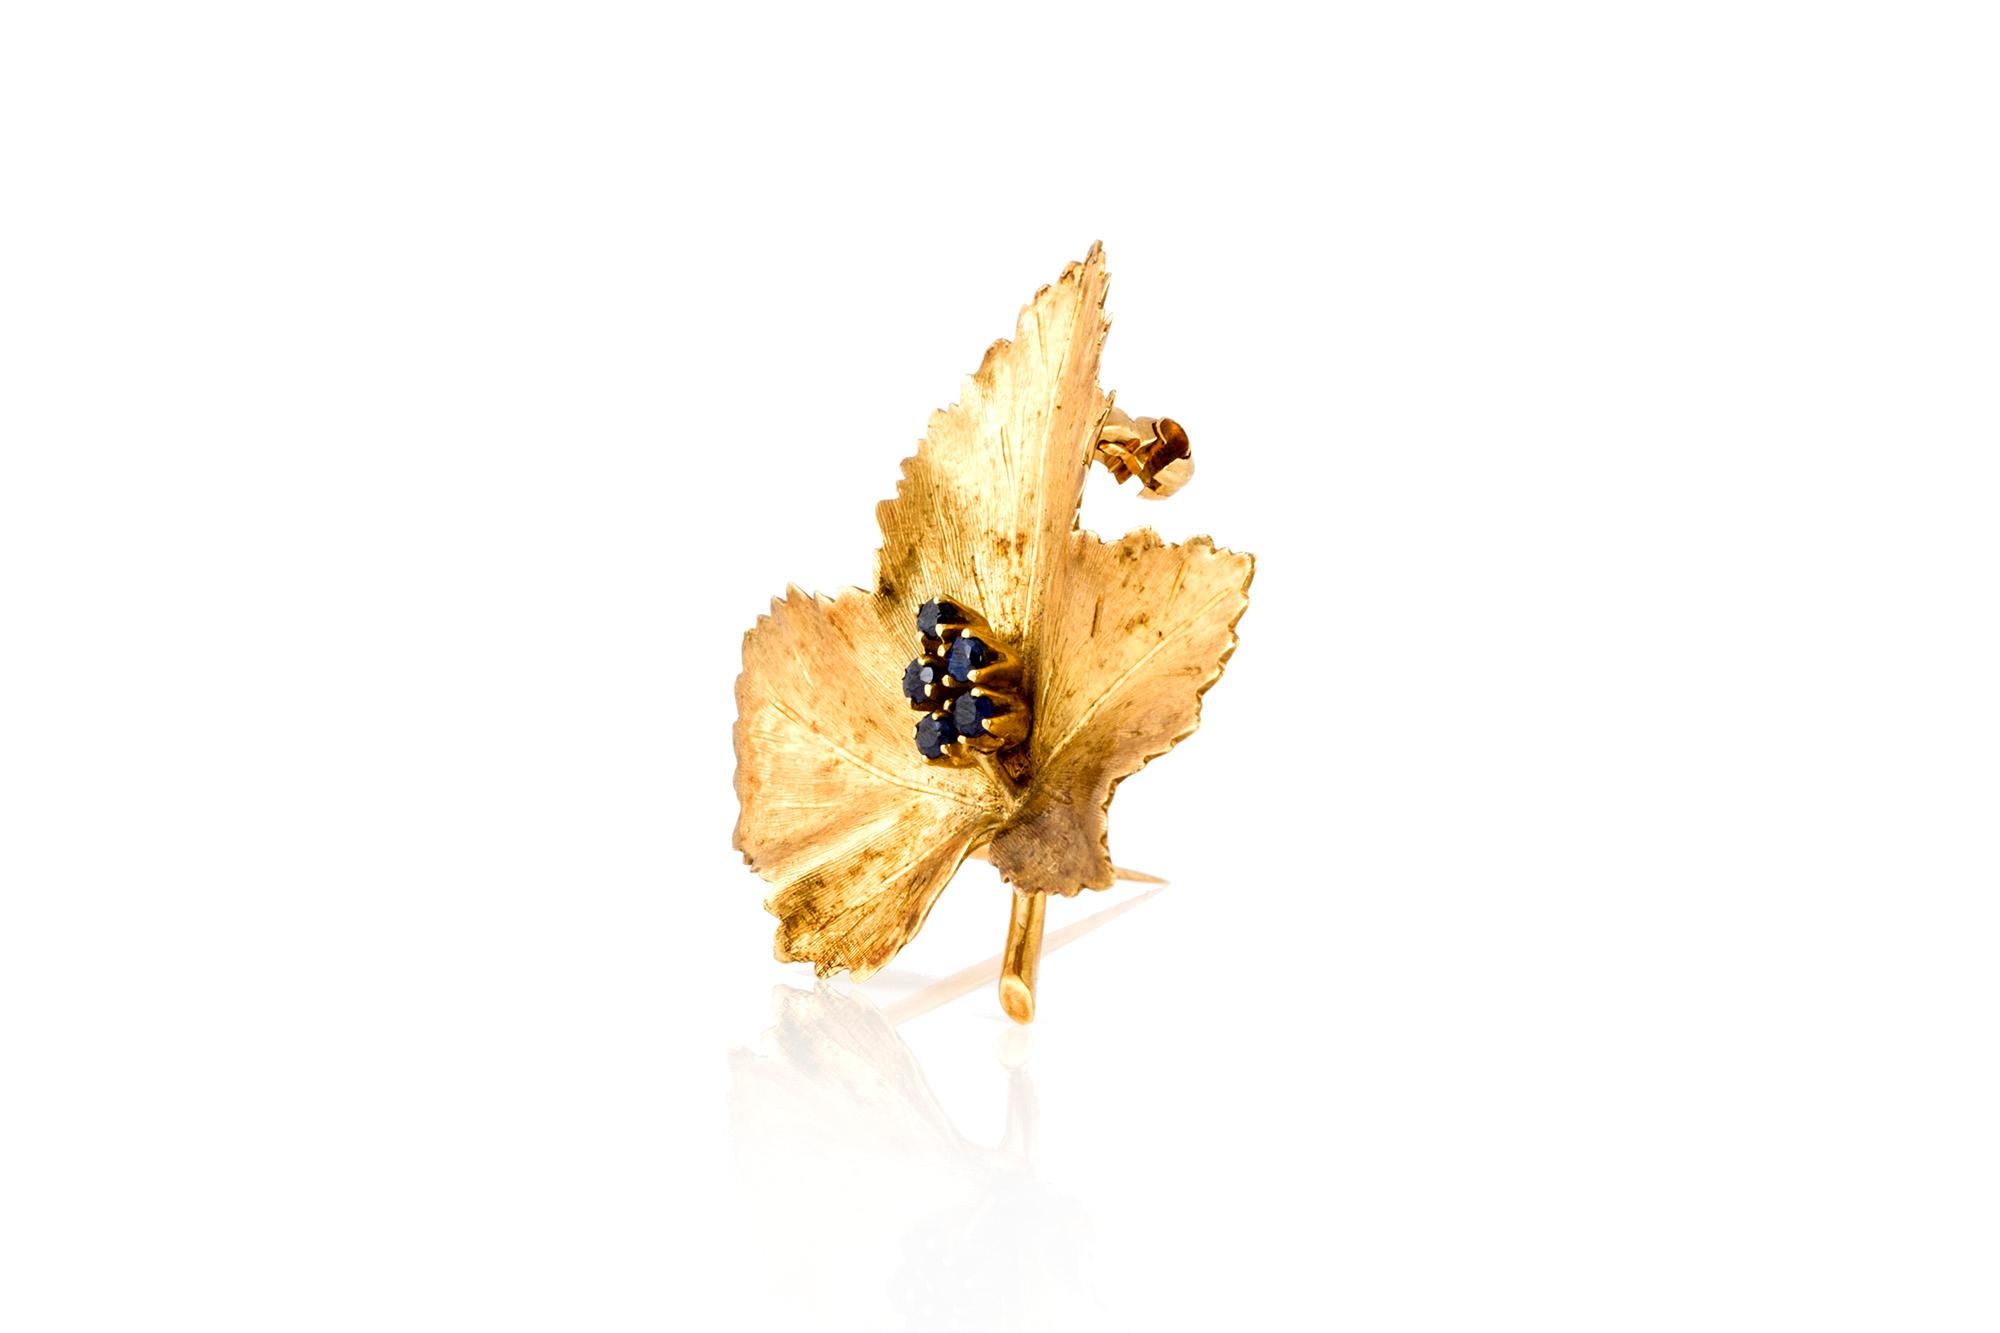 The brooch is finely crafted in 18k yellow gold and weighing approximately total of 5.2 dwt with sapphire weighing approximately total of 0.25 carat.